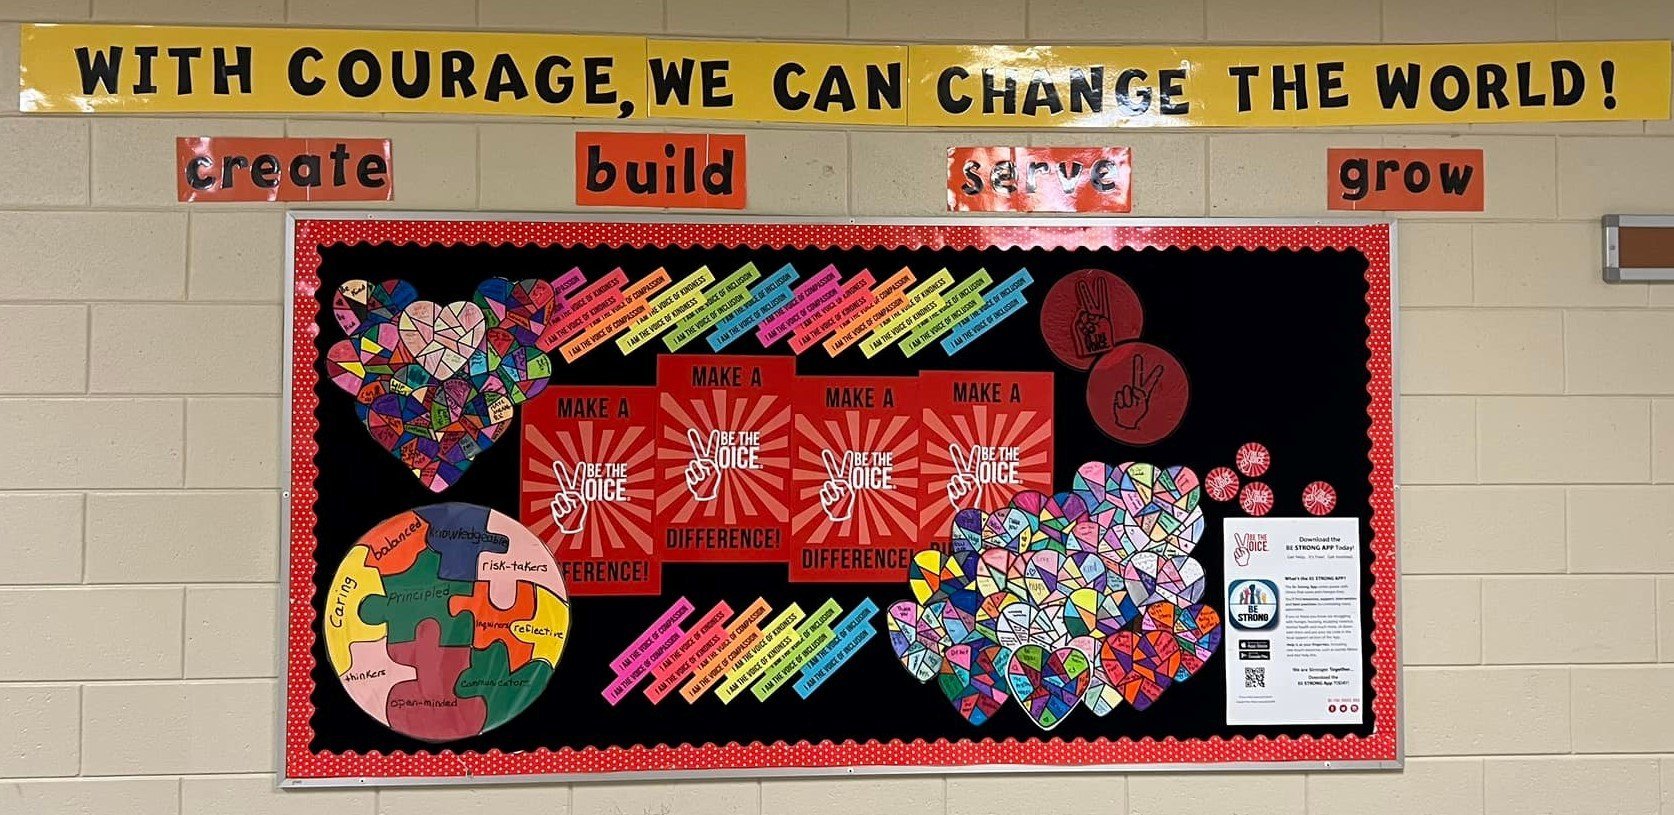 RIDGEVIEW CHARTER MIDDLE – HELPING TO SPREAD THE MESSAGE